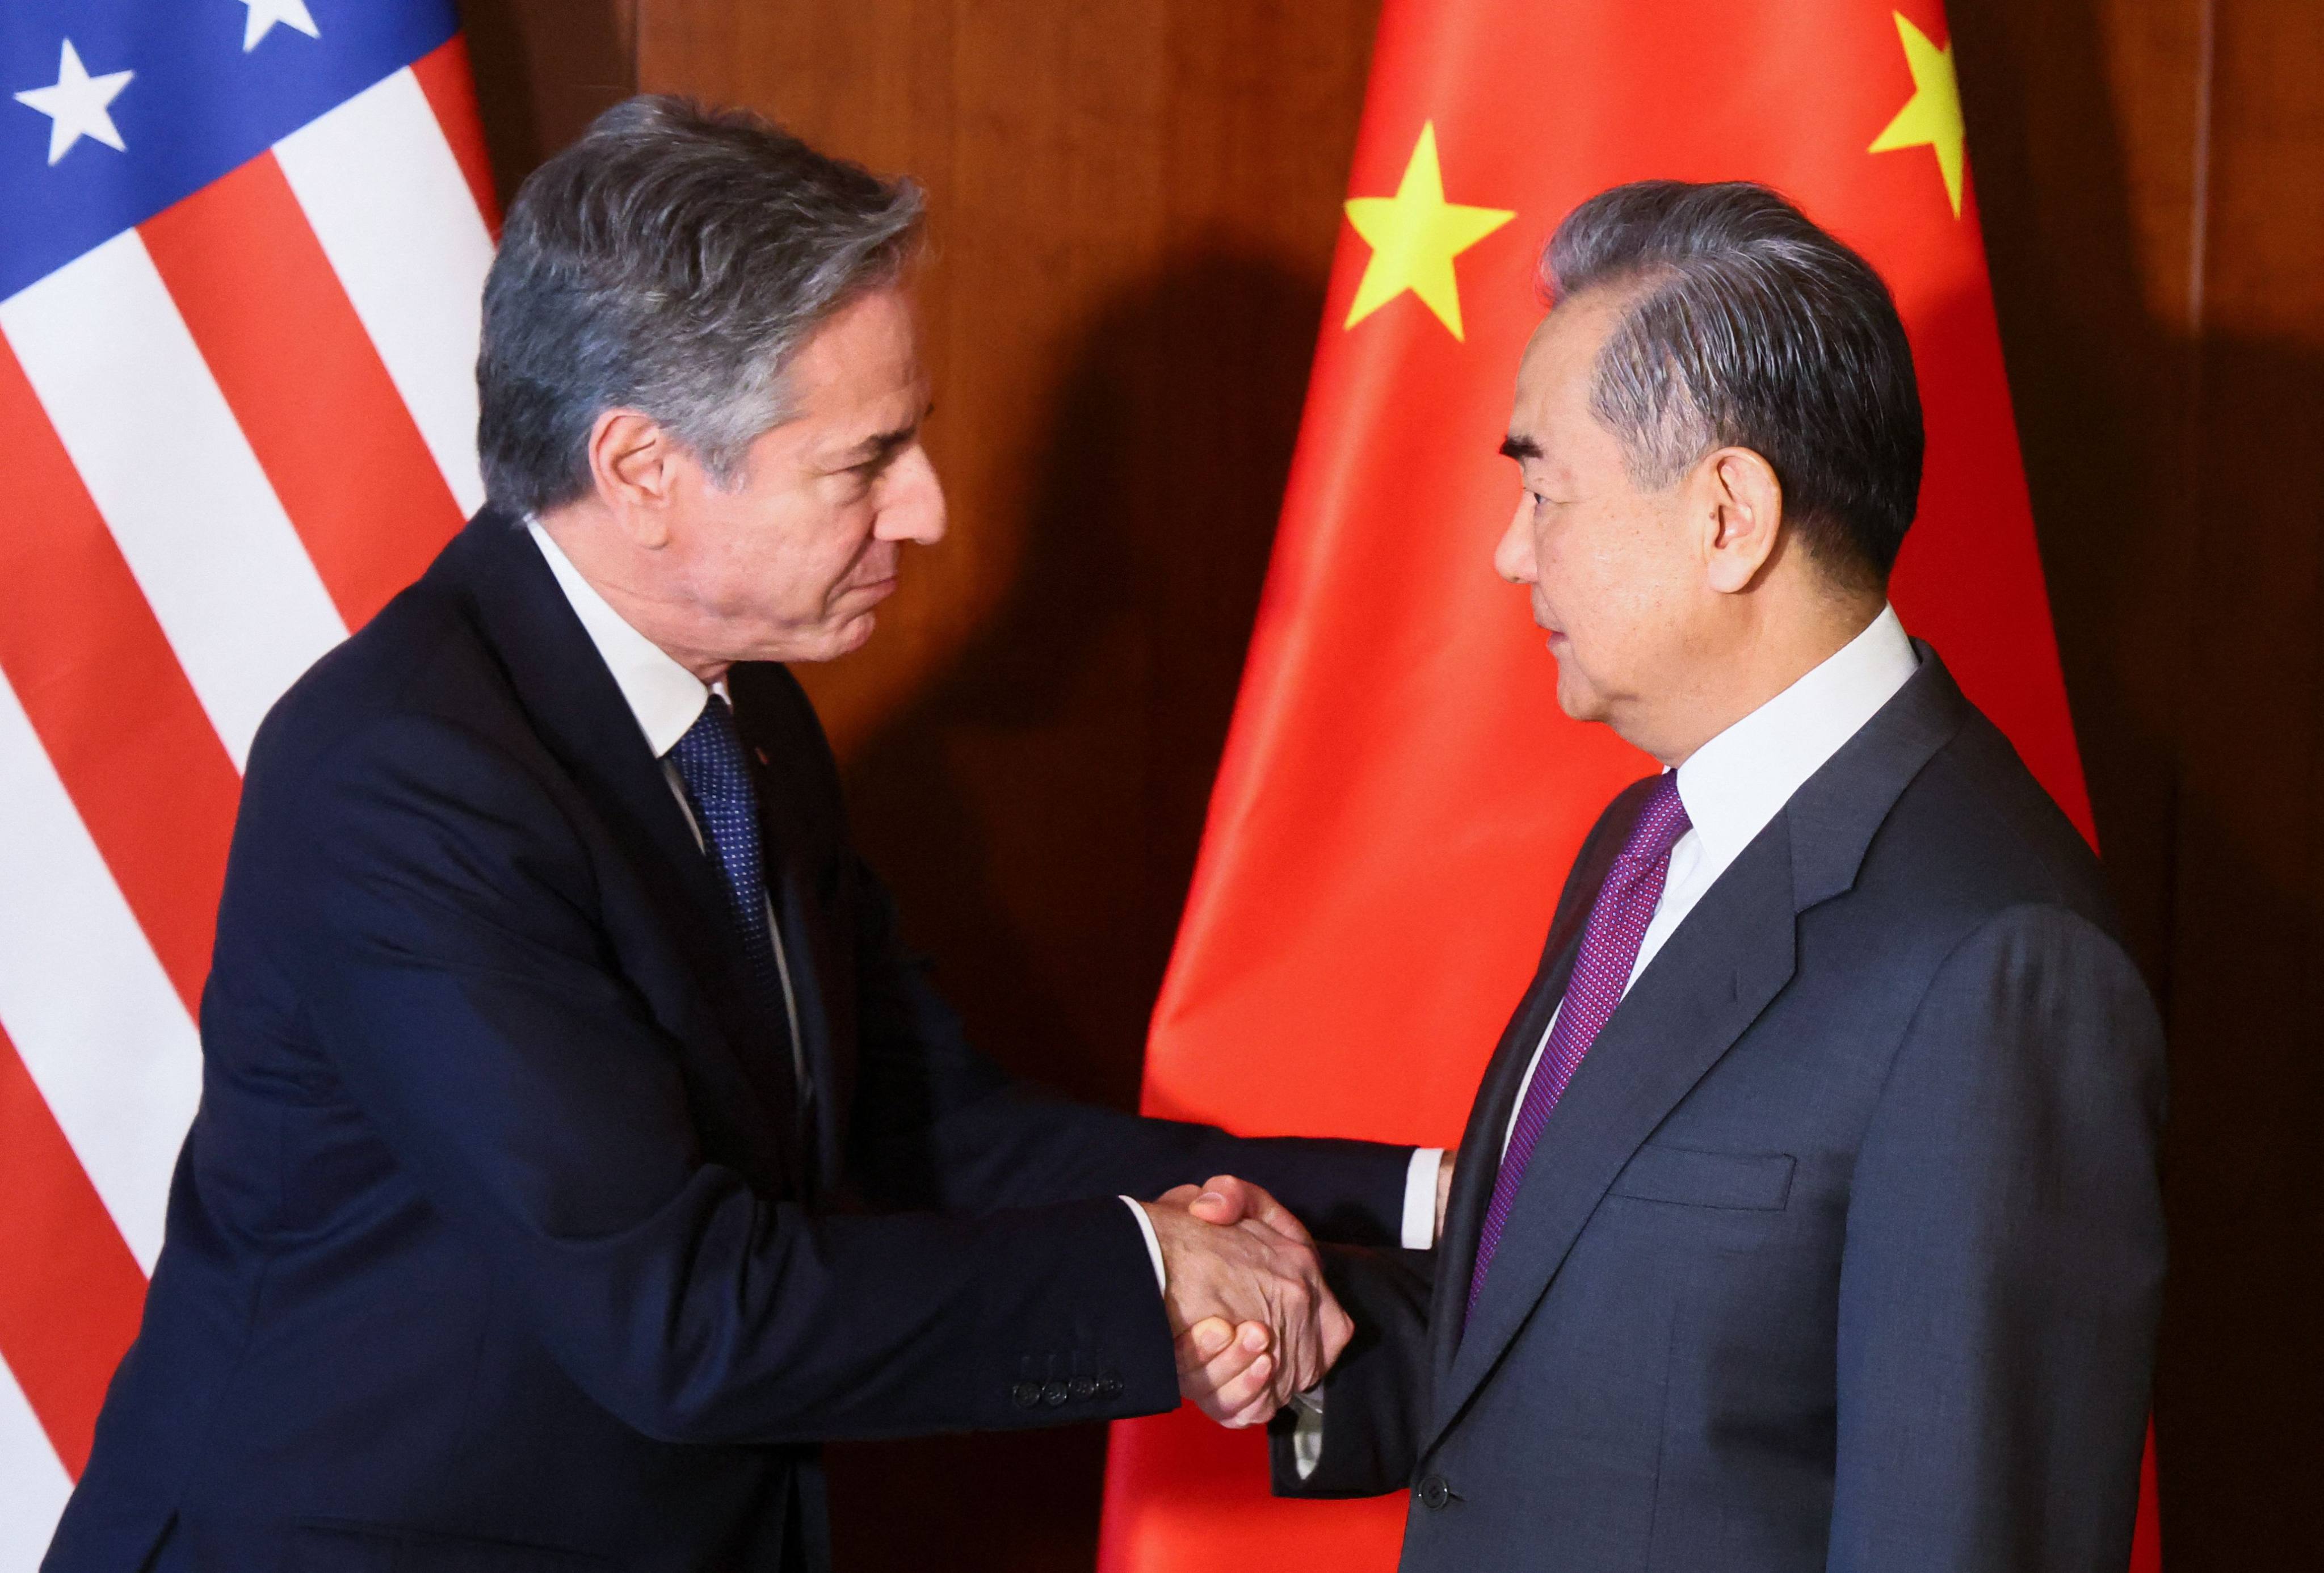 US Secretary of State Antony Blinken  and Chinese Foreign Minister Wang Yi meet at the 60th Munich Security Conference in Germany on Friday. Photo: AFP